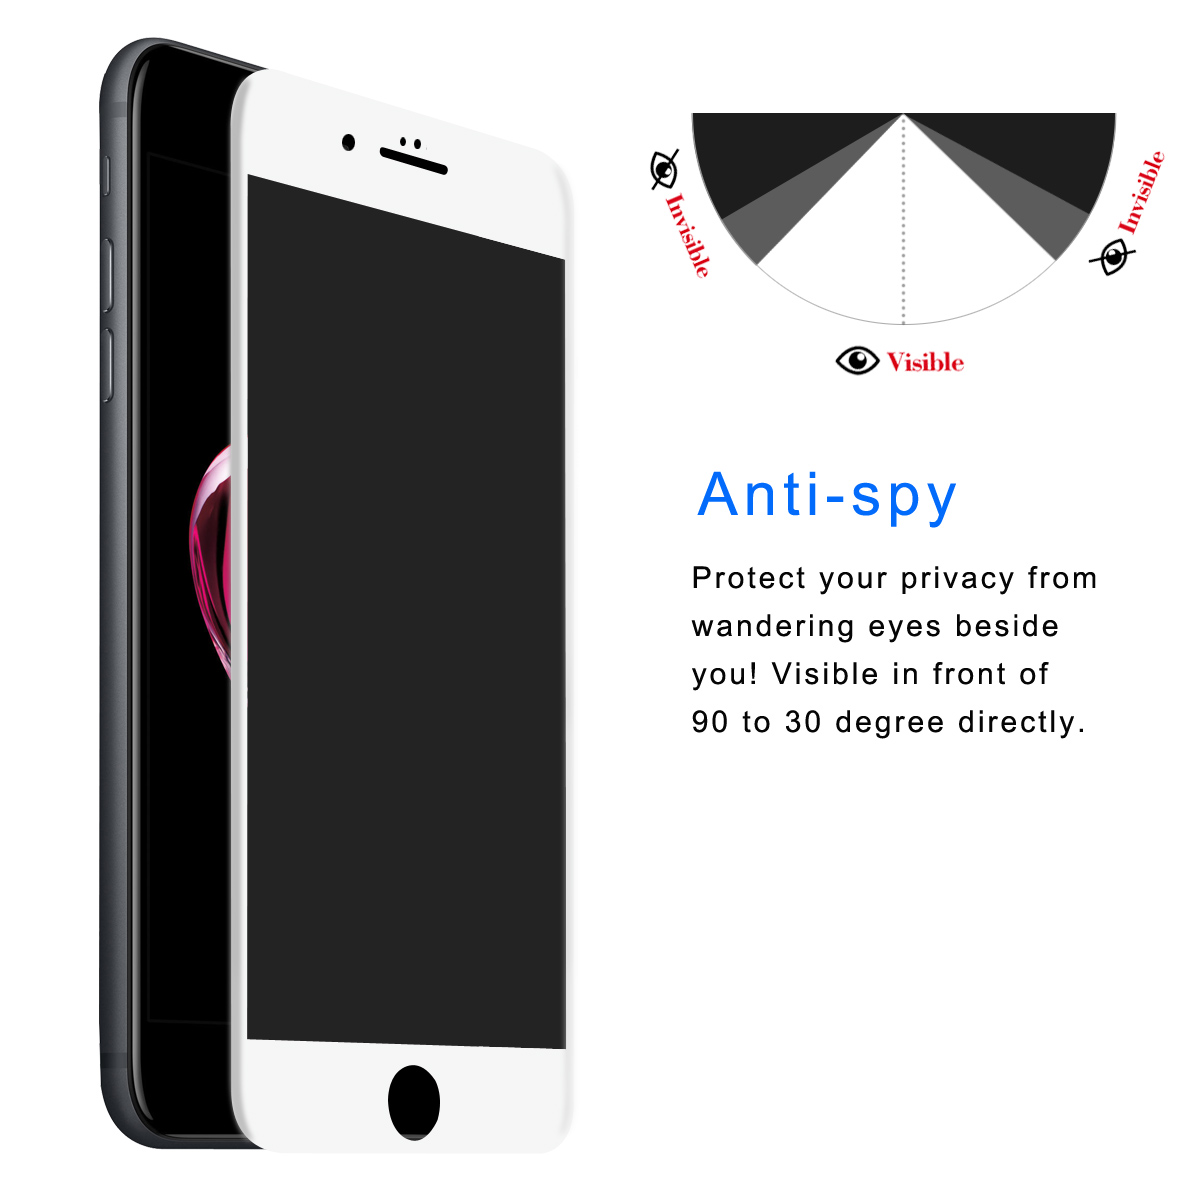 ENKAY-Anti-Spy-3D-Arc-Edge-026mm-9H-Carbon-Fiber-Tempered-Glass-Screen-Protector-for-iPhone-6-6s-1162559